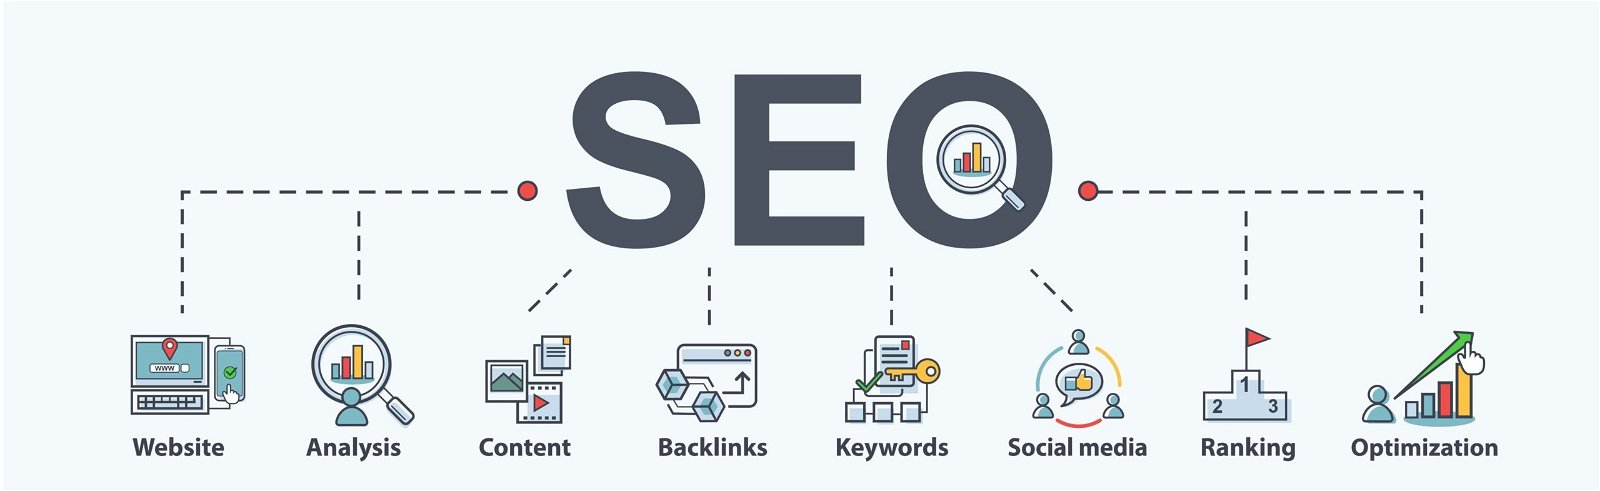 SEO Components- Guide to Healthcare SEO